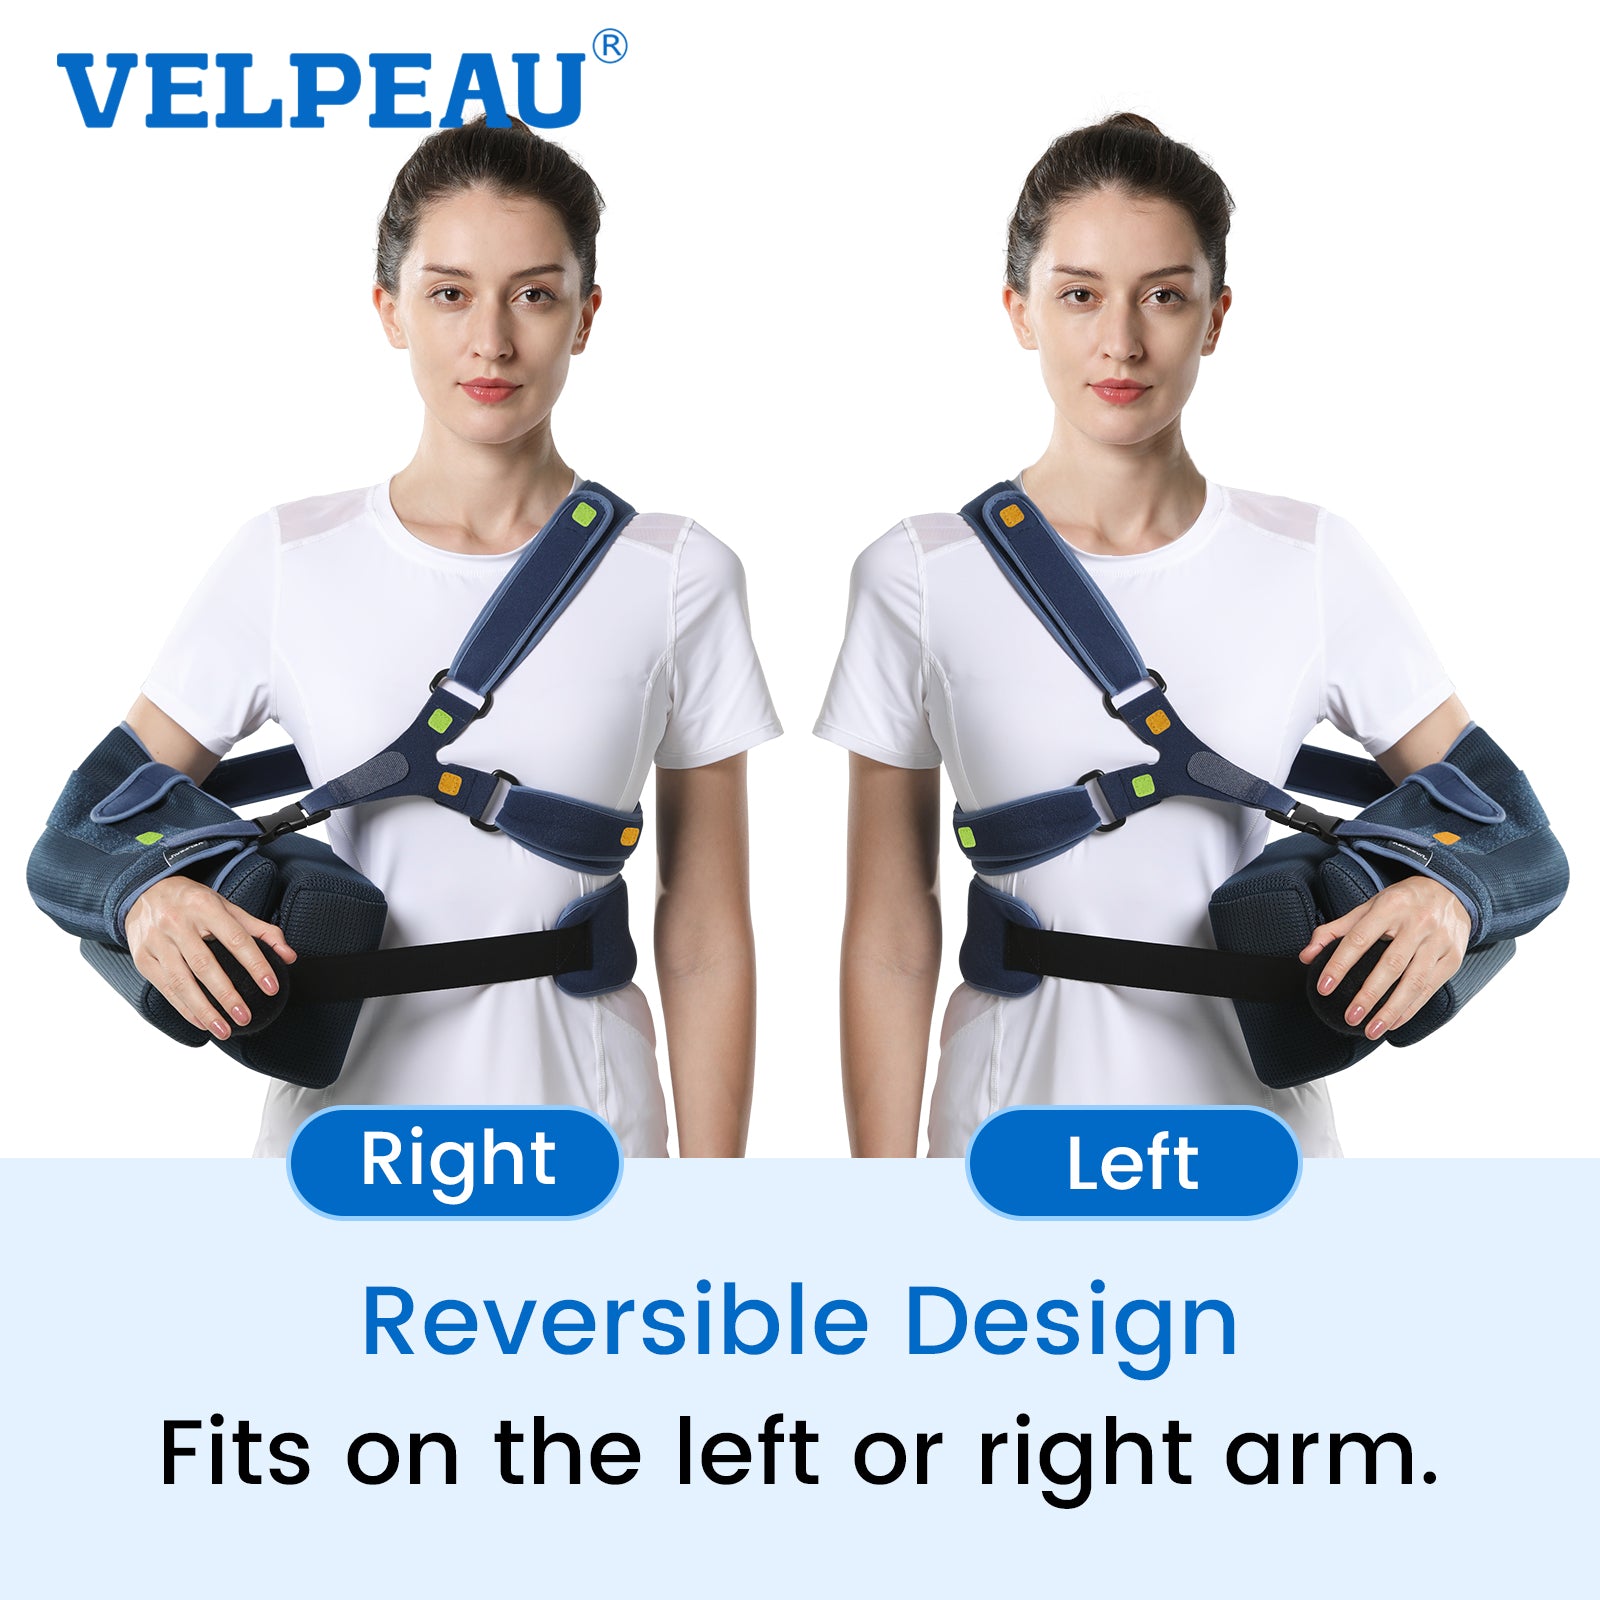 VP0307 Arm Sling with Abduction Pillow for Men Women, Shoulder Support Immobilizer